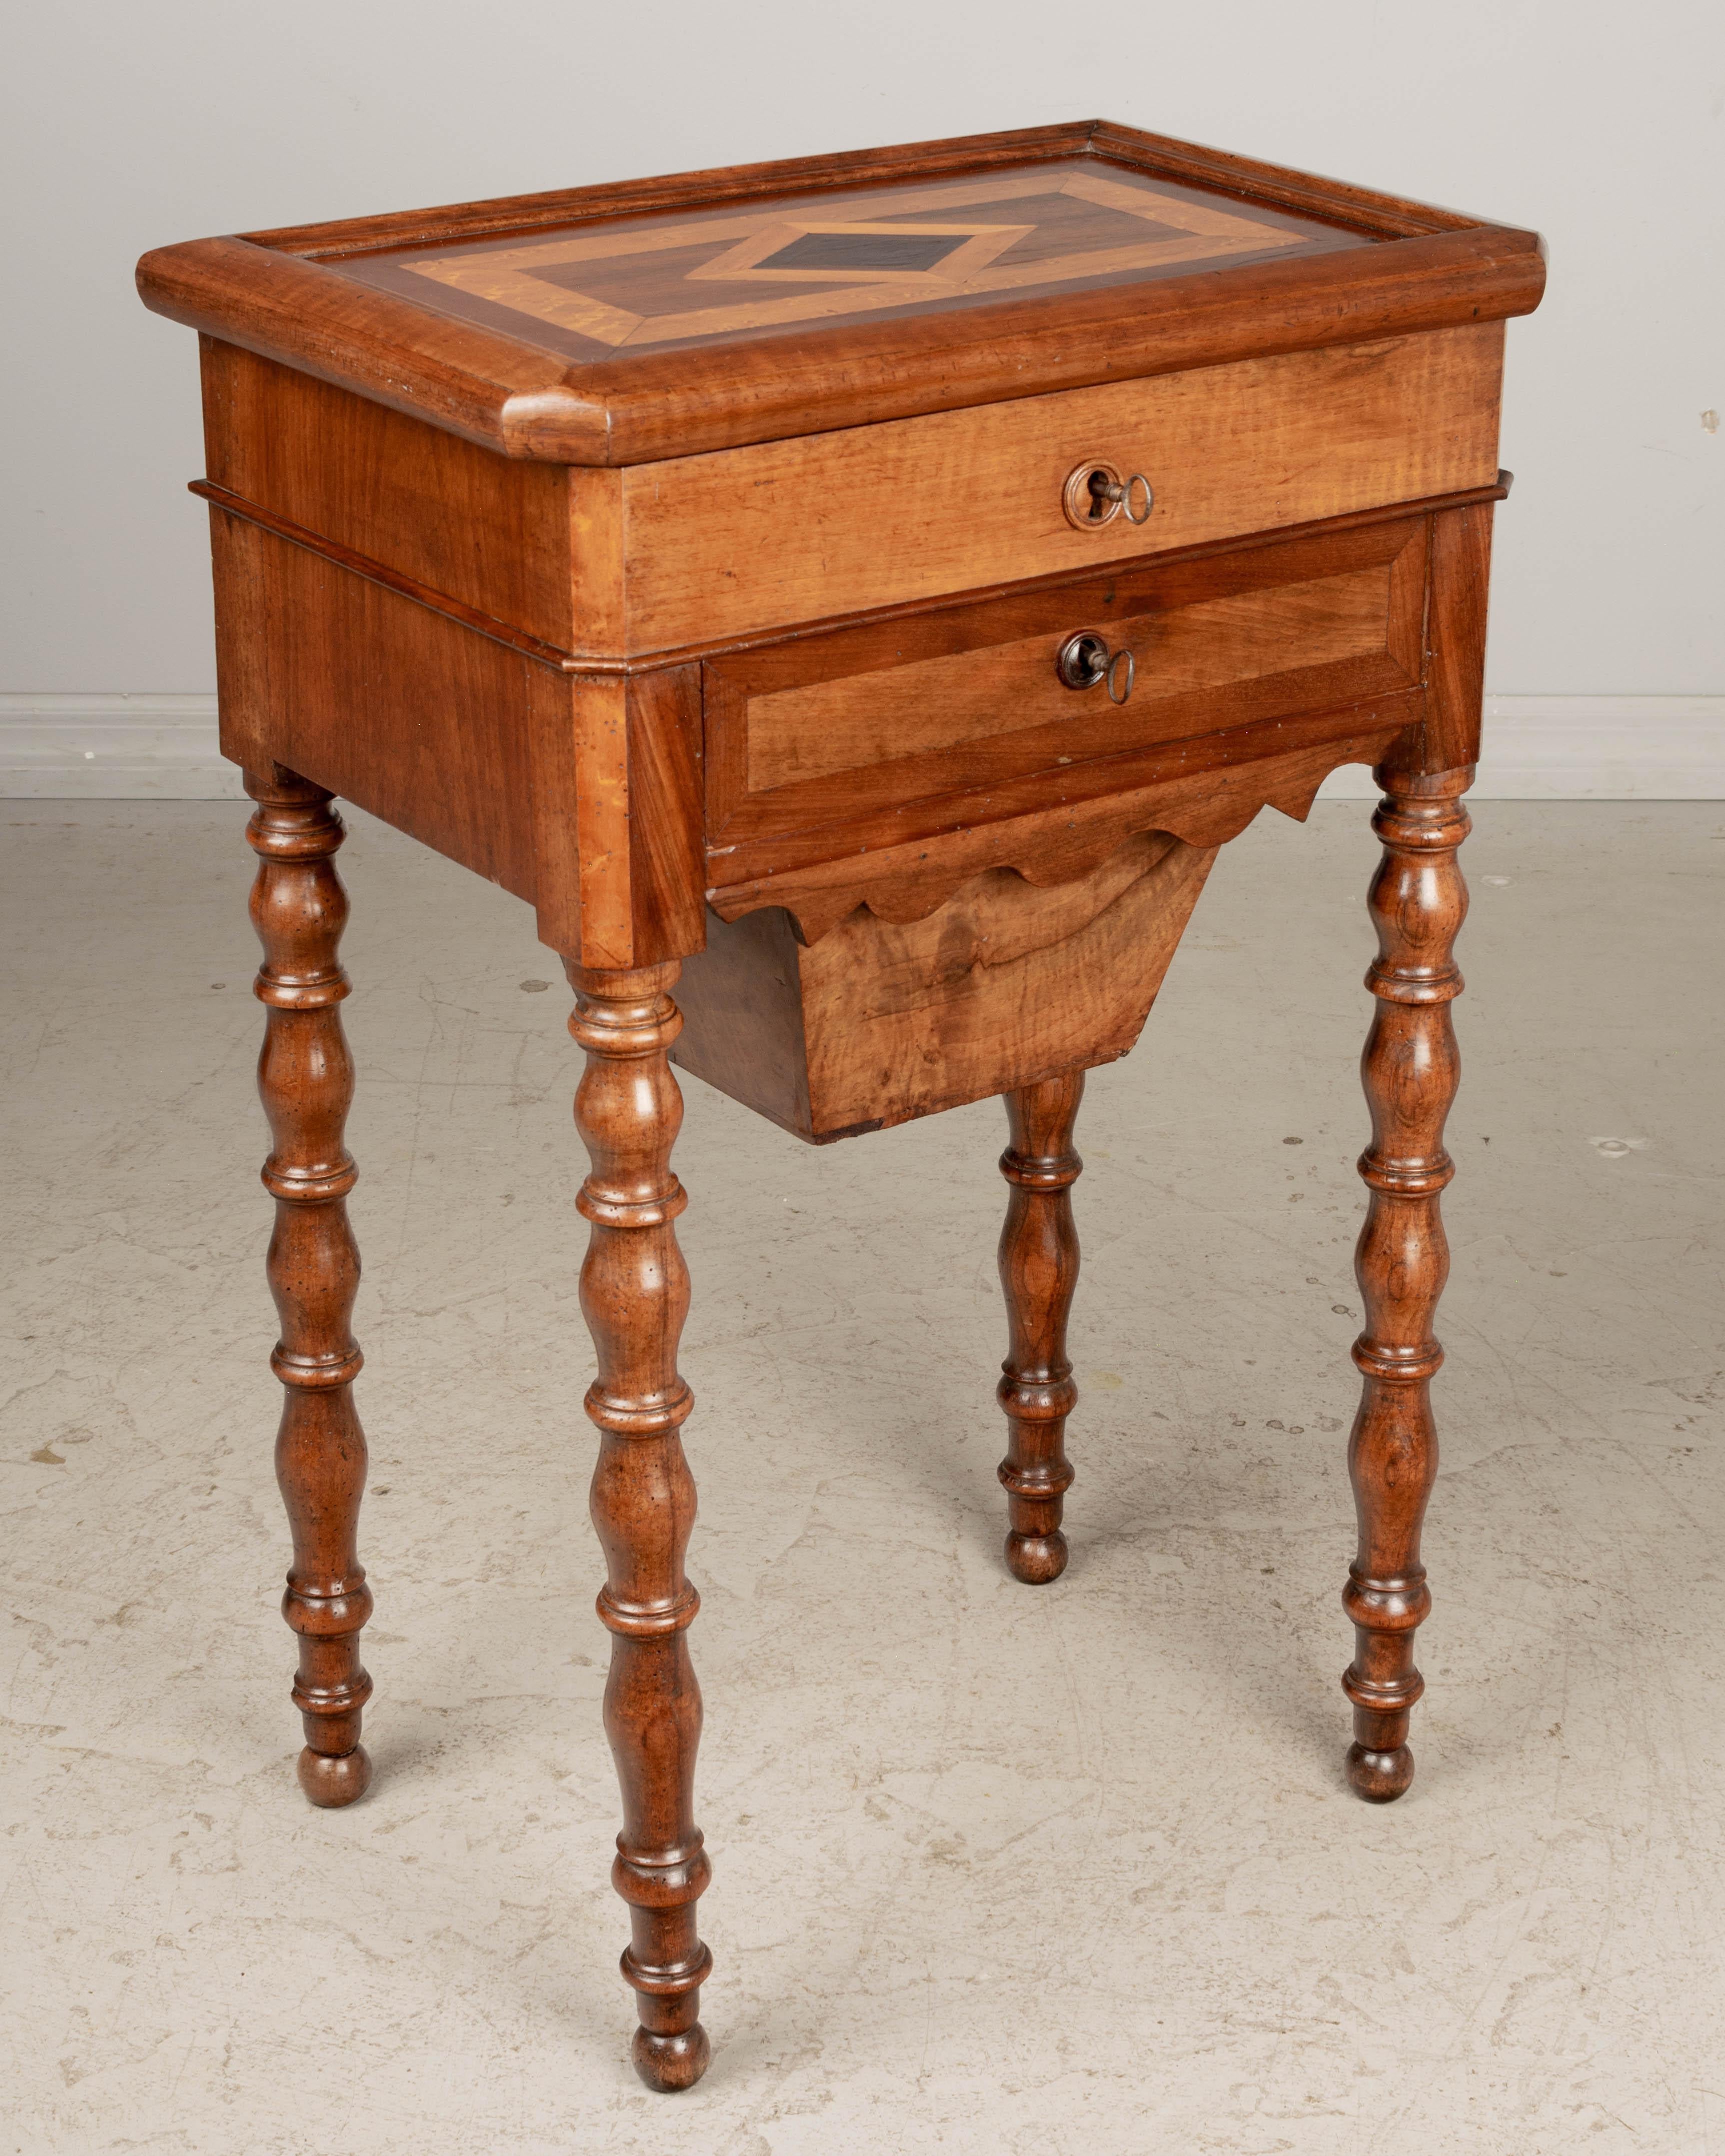 A fine early 19th century French Louis Philippe travailleuse, or work table used for storing sewing implements and embroidery silk. Made of walnut with two dovetailed drawers, each with working lock and key and a deep pull-out compartment below.